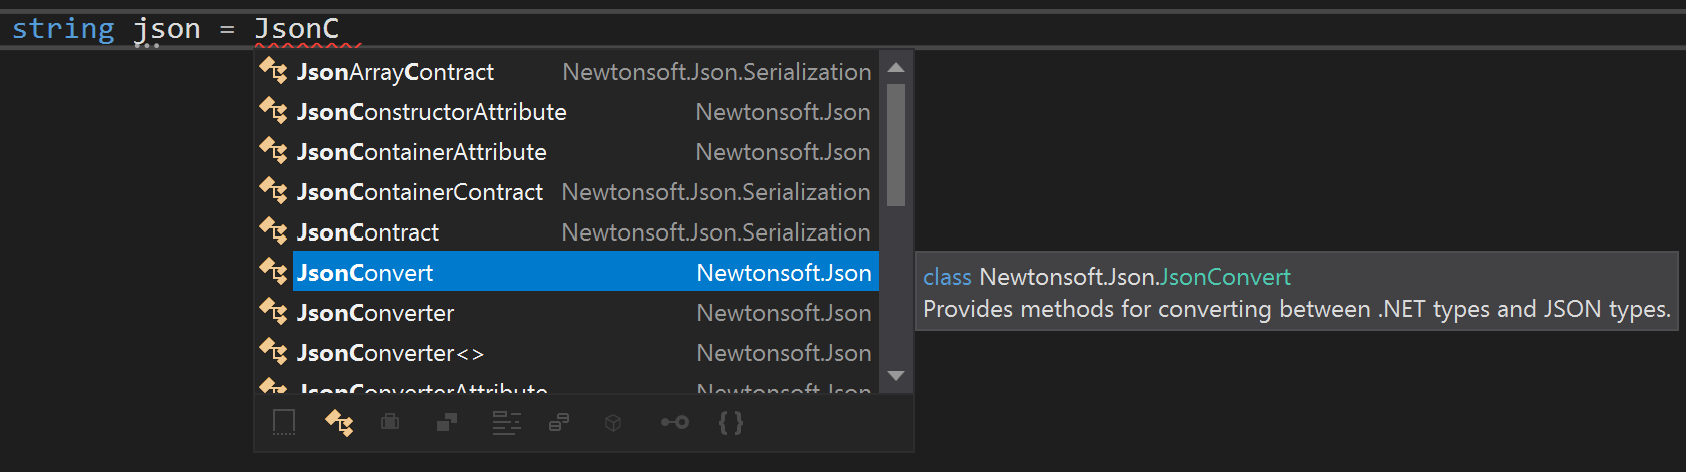 Intellisense completion for unimported types